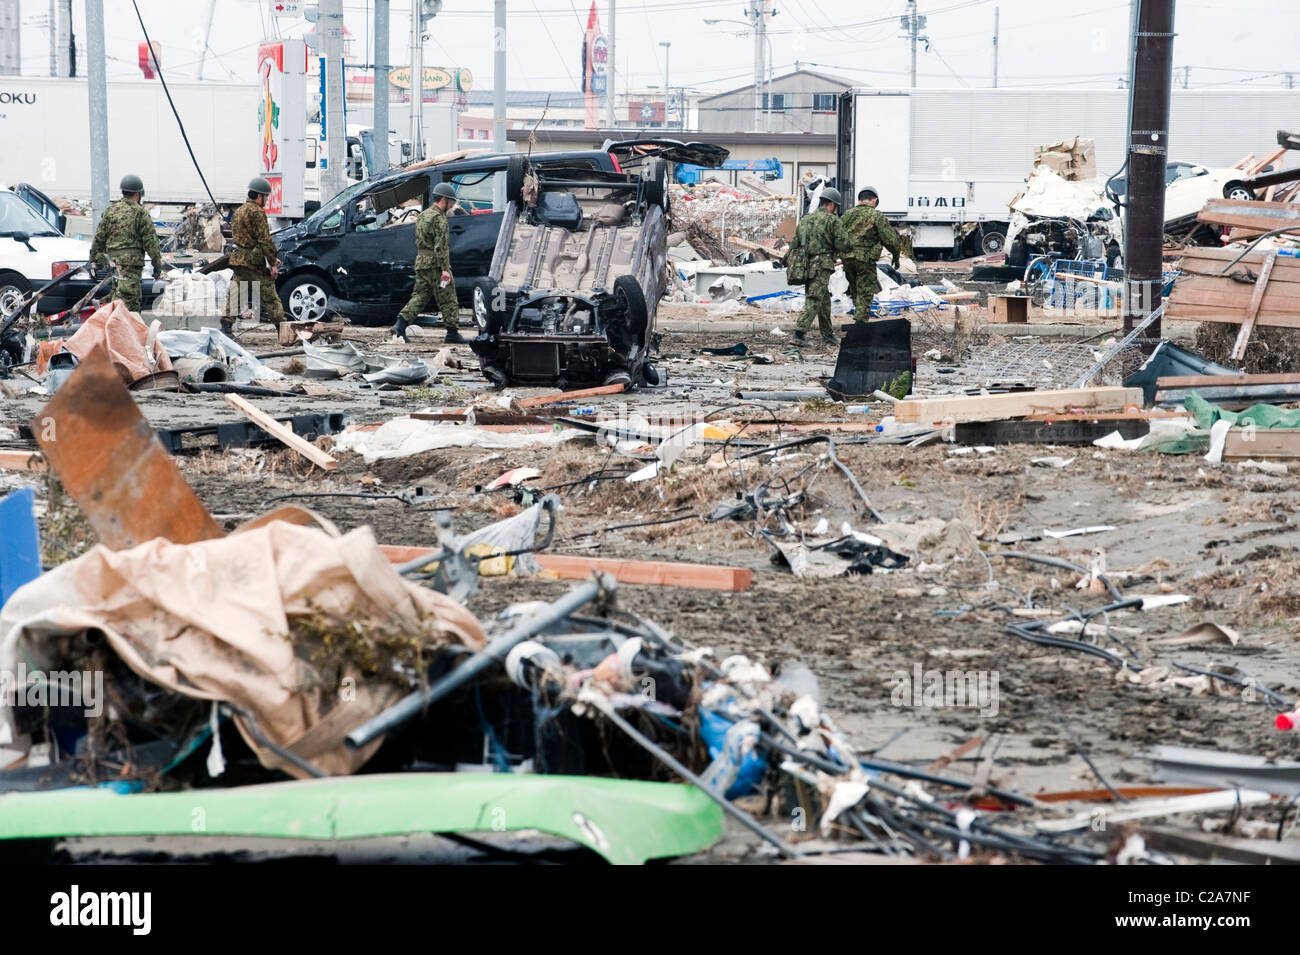 Thousands of cars and trucks were destroyed as were many victims after 9.0 Mw earthquake triggered a Tsunami in Japan 2011 Stock Photo